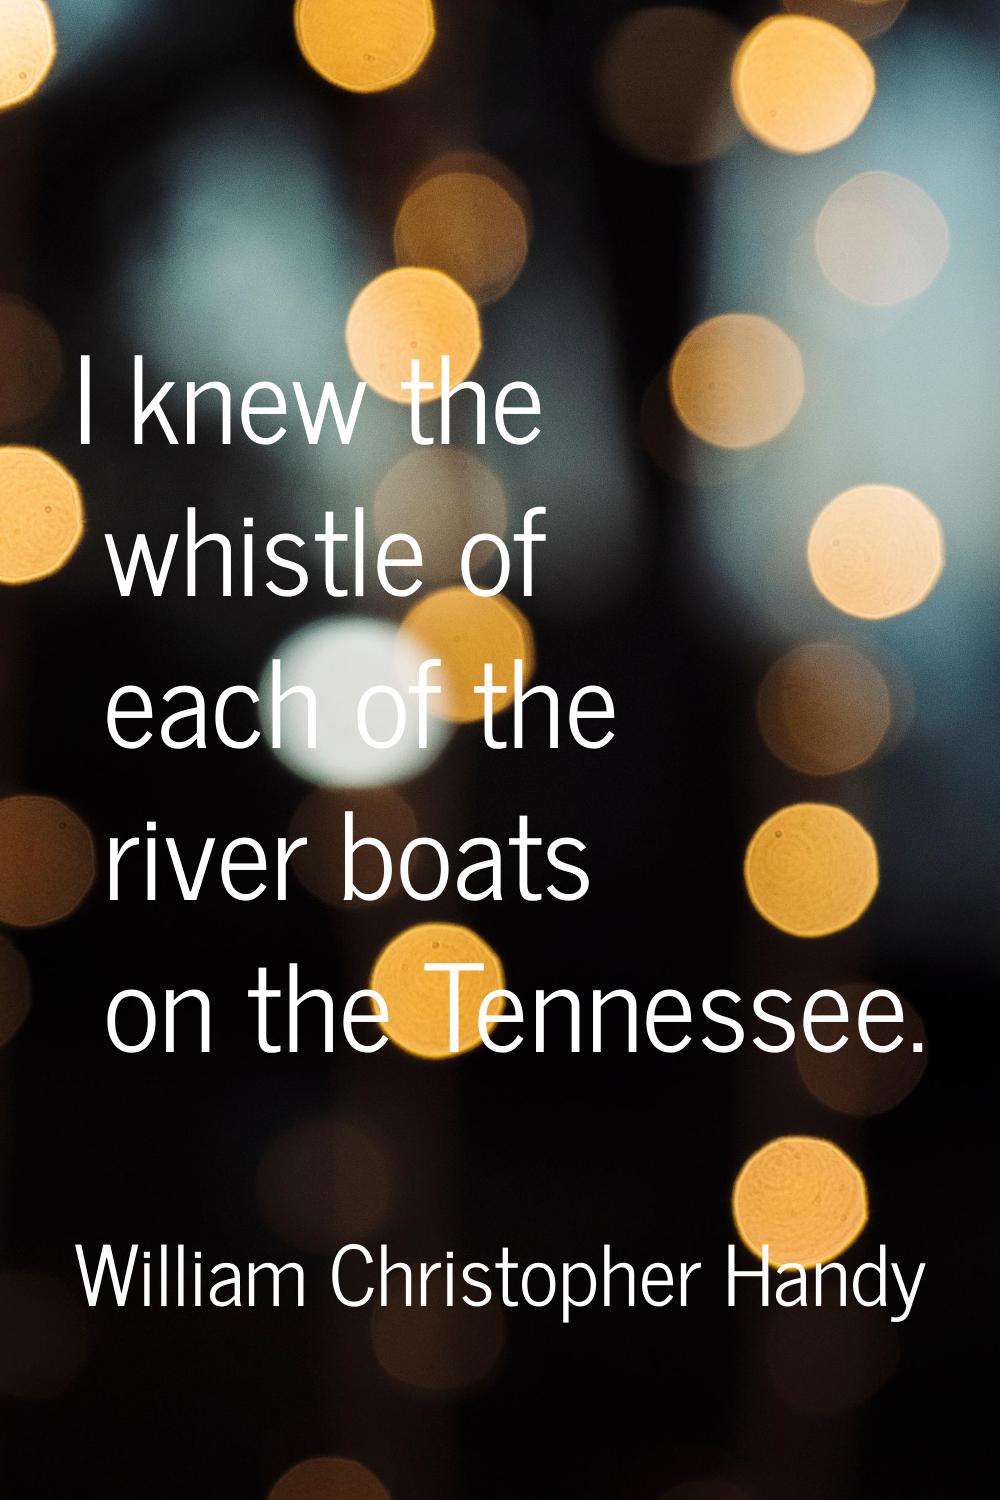 I knew the whistle of each of the river boats on the Tennessee.